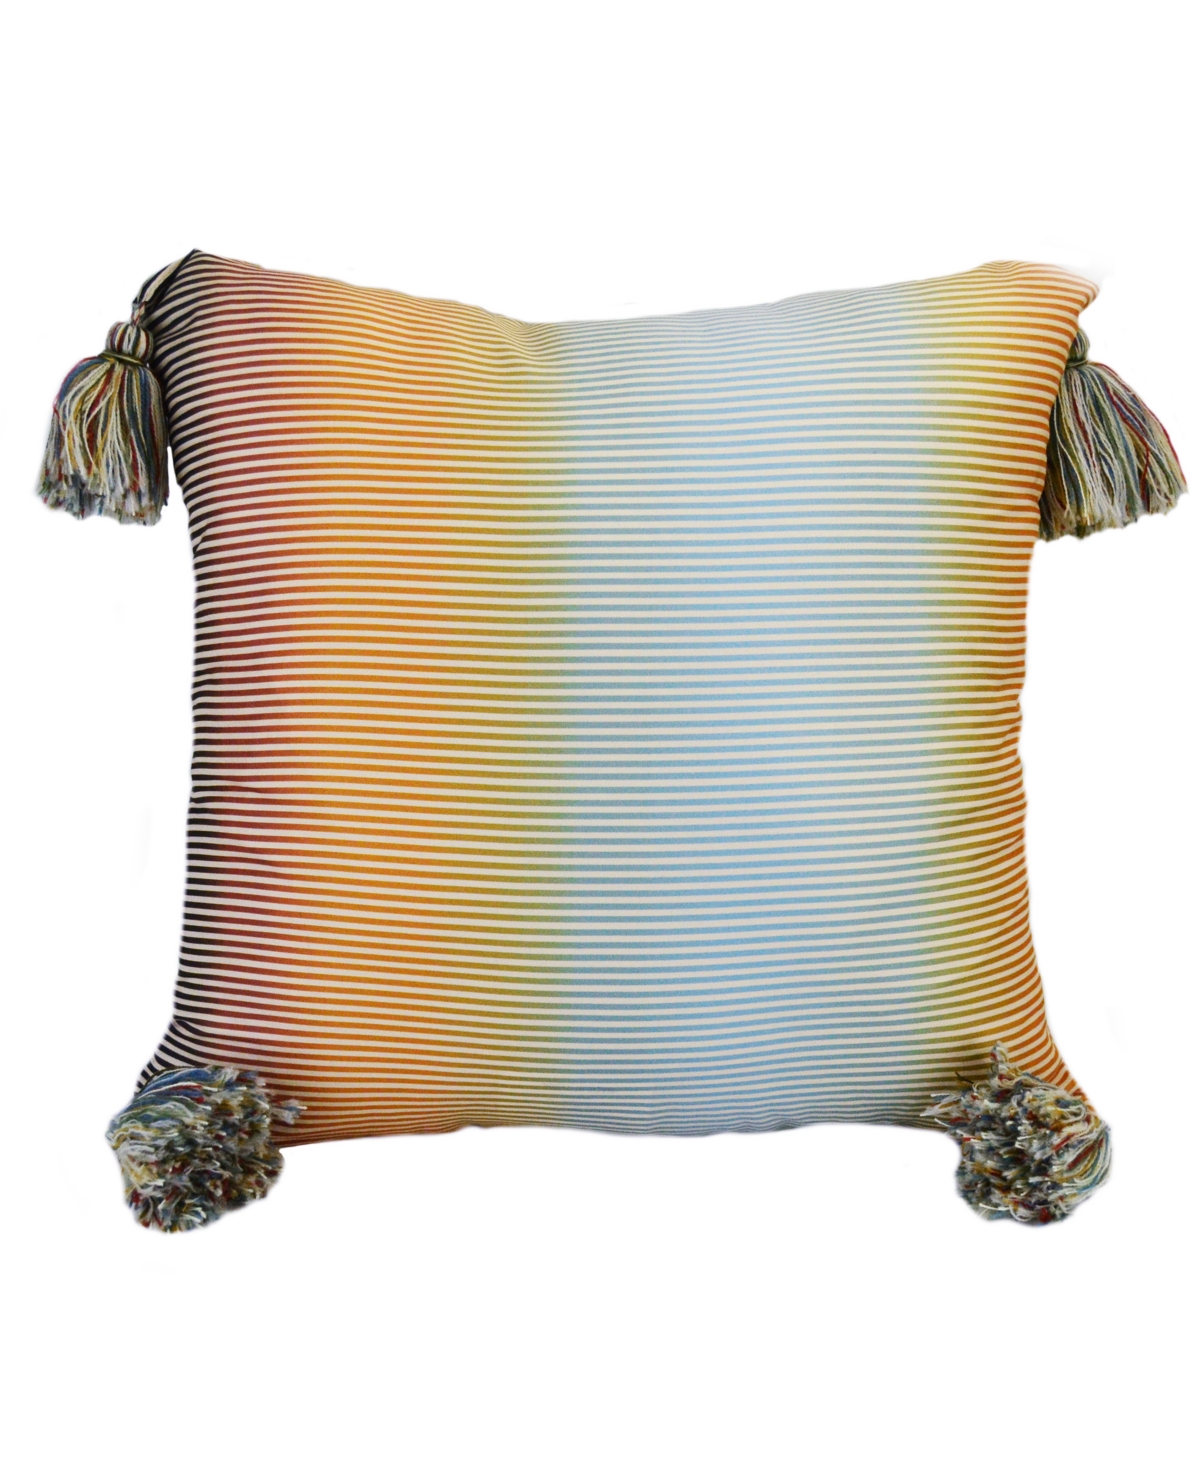 Donna Sharp Natures Collage Ombre Decorative Pillow, 18" X 18" In Multi